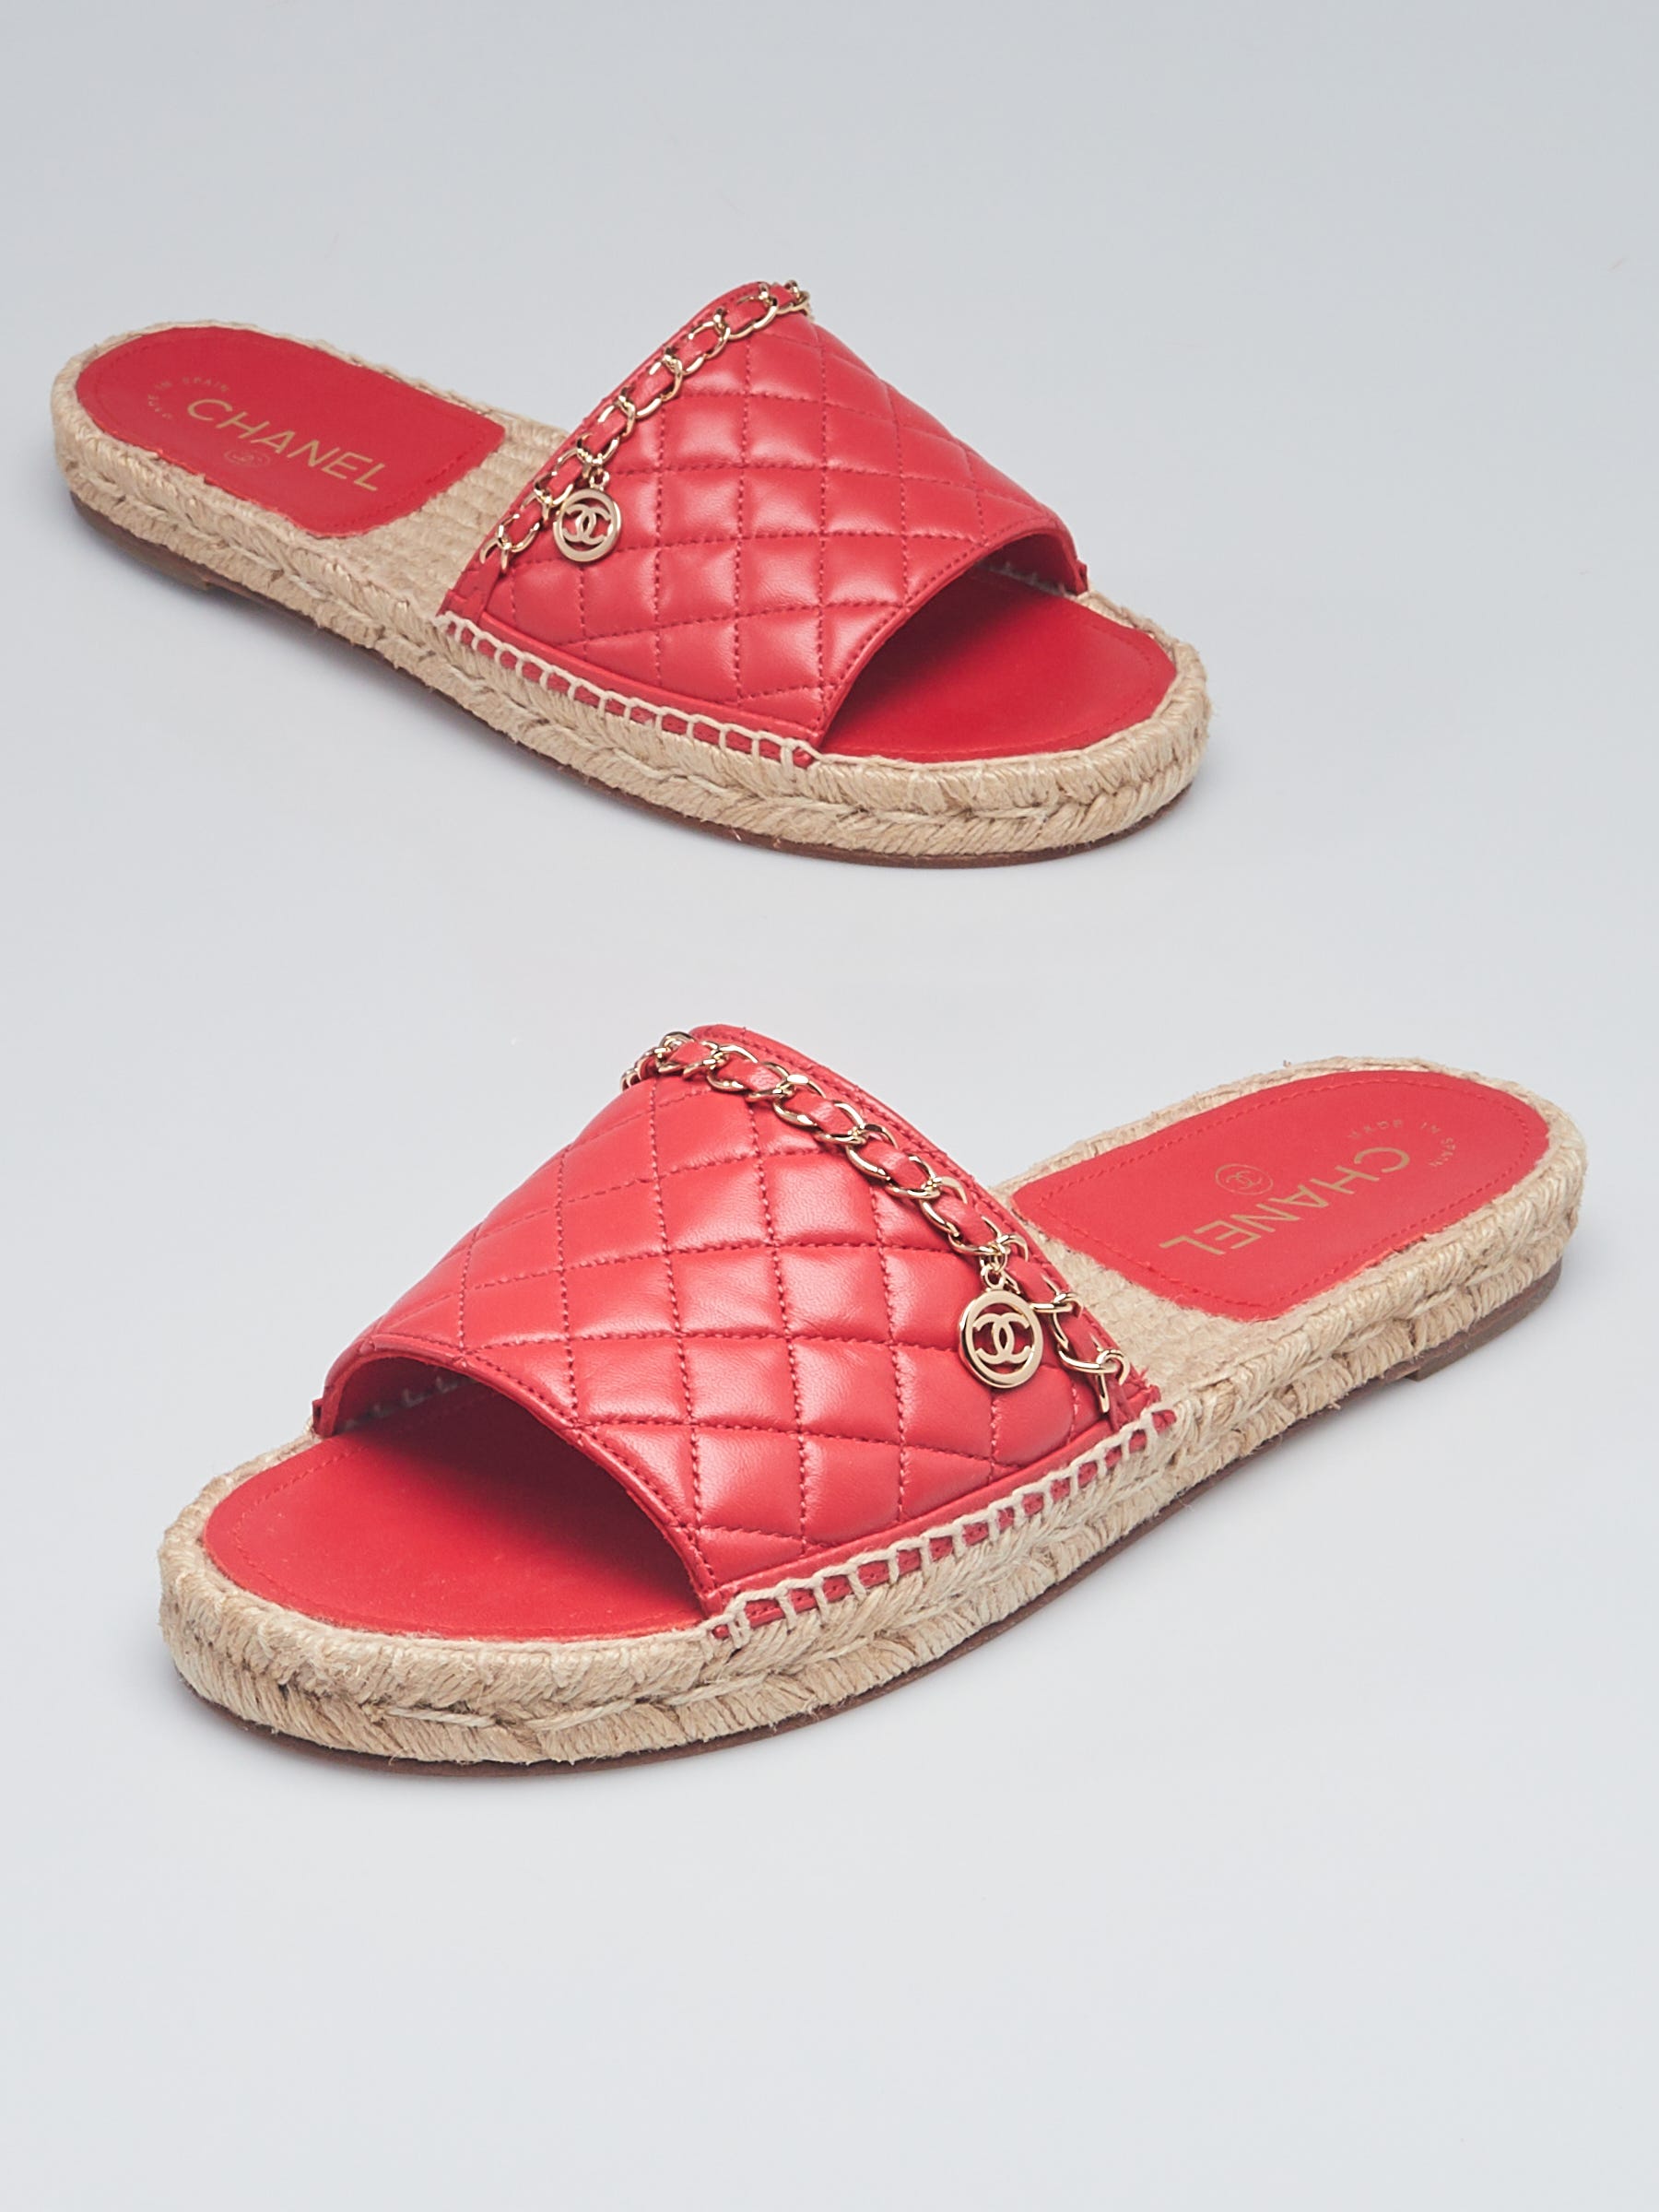 Chanel Red Quilted Lambskin Leather Chain Espadrille Flat Sandals Size 9.5/ 40 - Yoogi's Closet